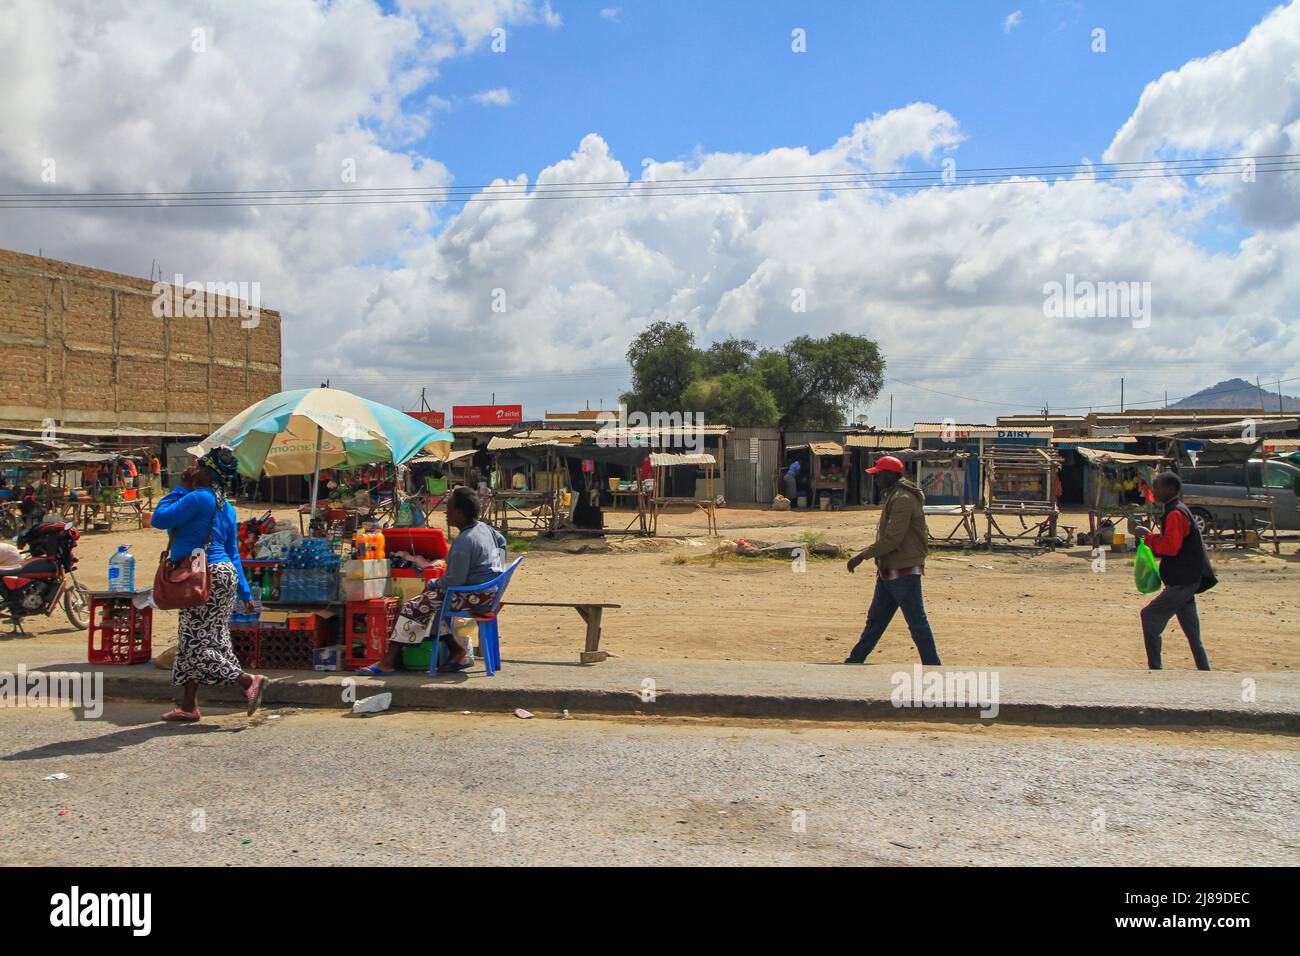 People walk by market stall in front of shops and marketplace in town in Kenya. Africa Stock Photo